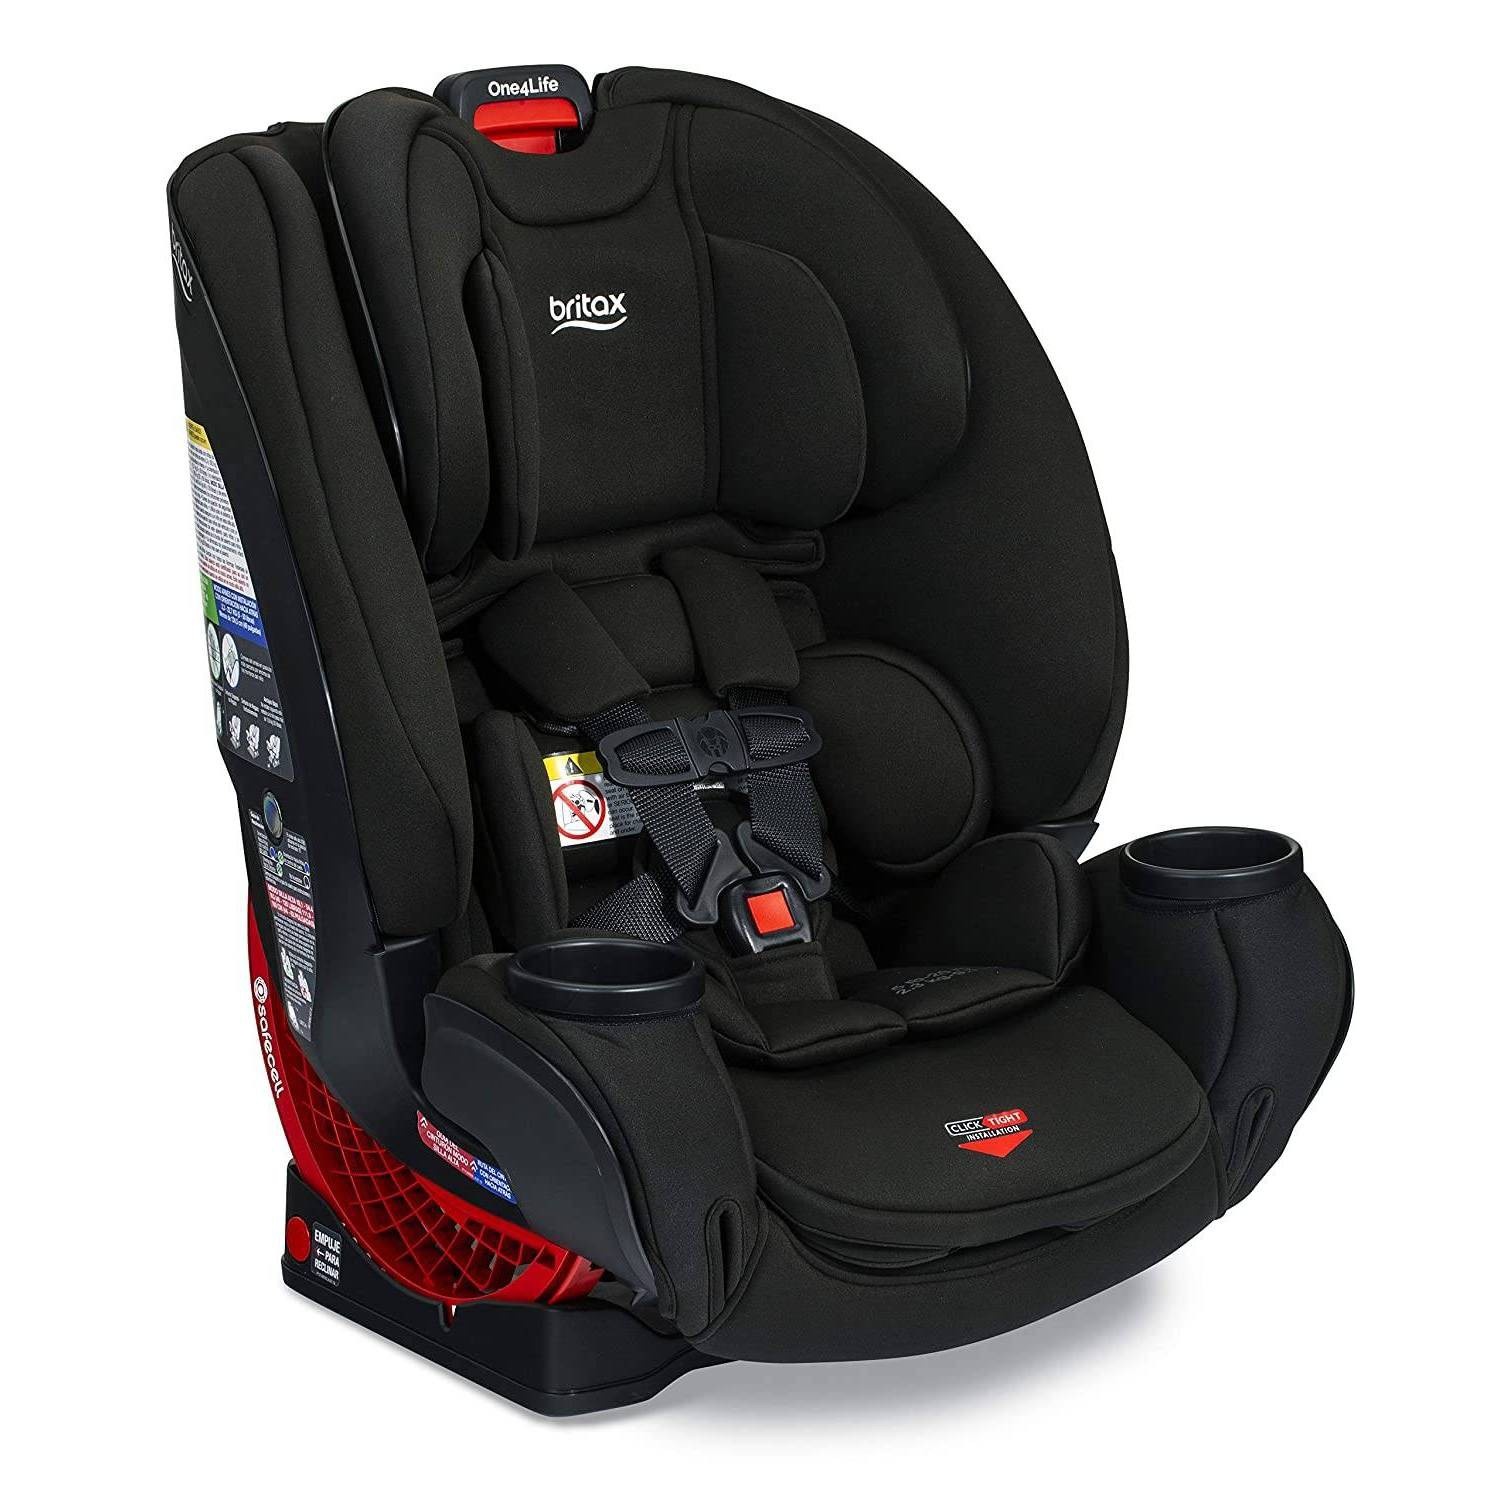 slide 1 of 9, Britax One4Life ClickTight All in One Convertible Car Seat - Black SafeWash, 1 ct